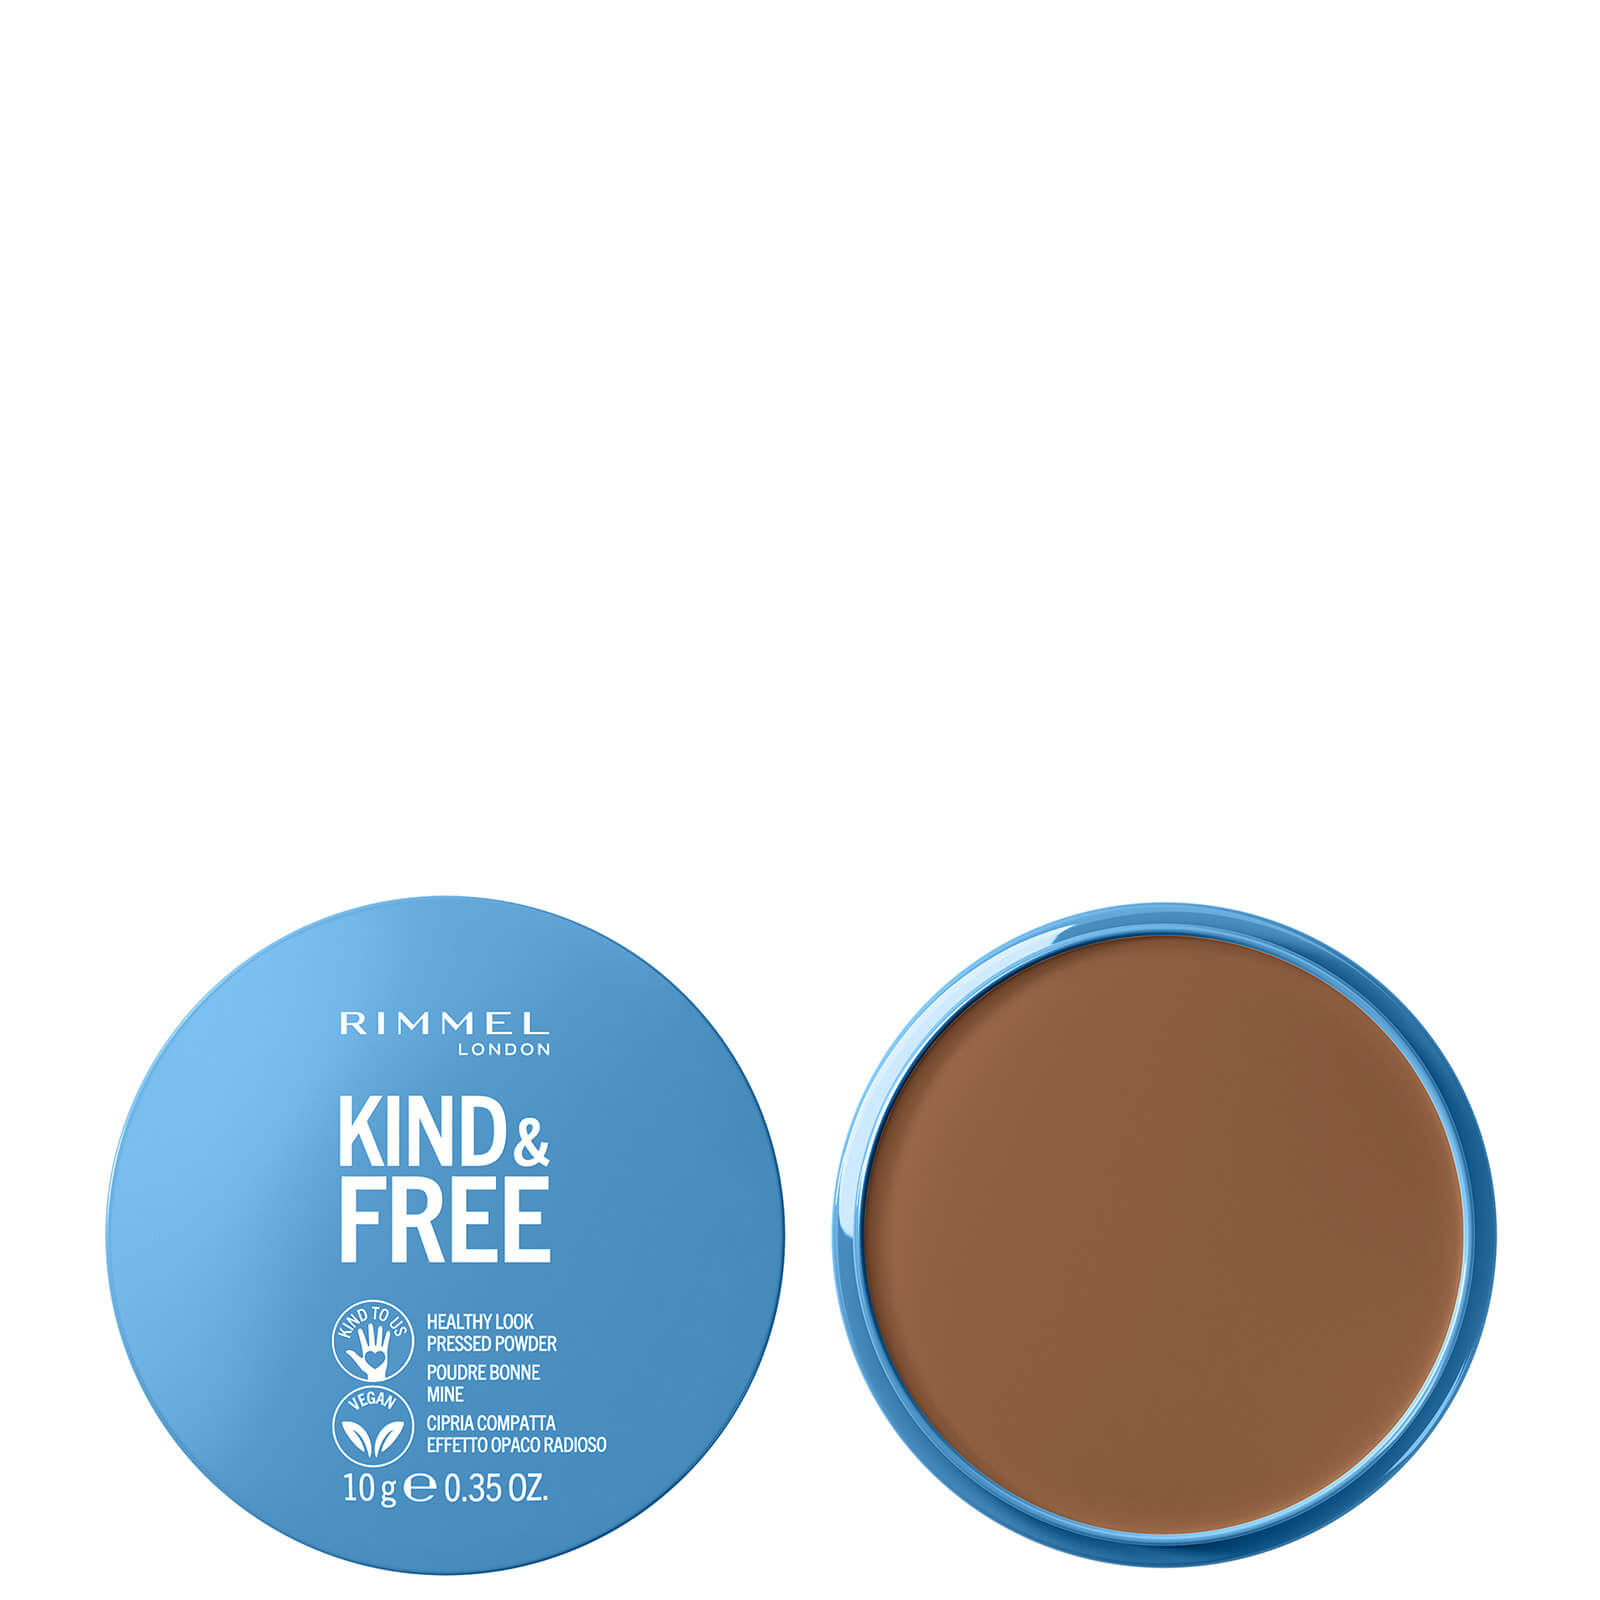 Image of Rimmel Kind and Free Pressed Powder 10g (Various Shades) - Deep